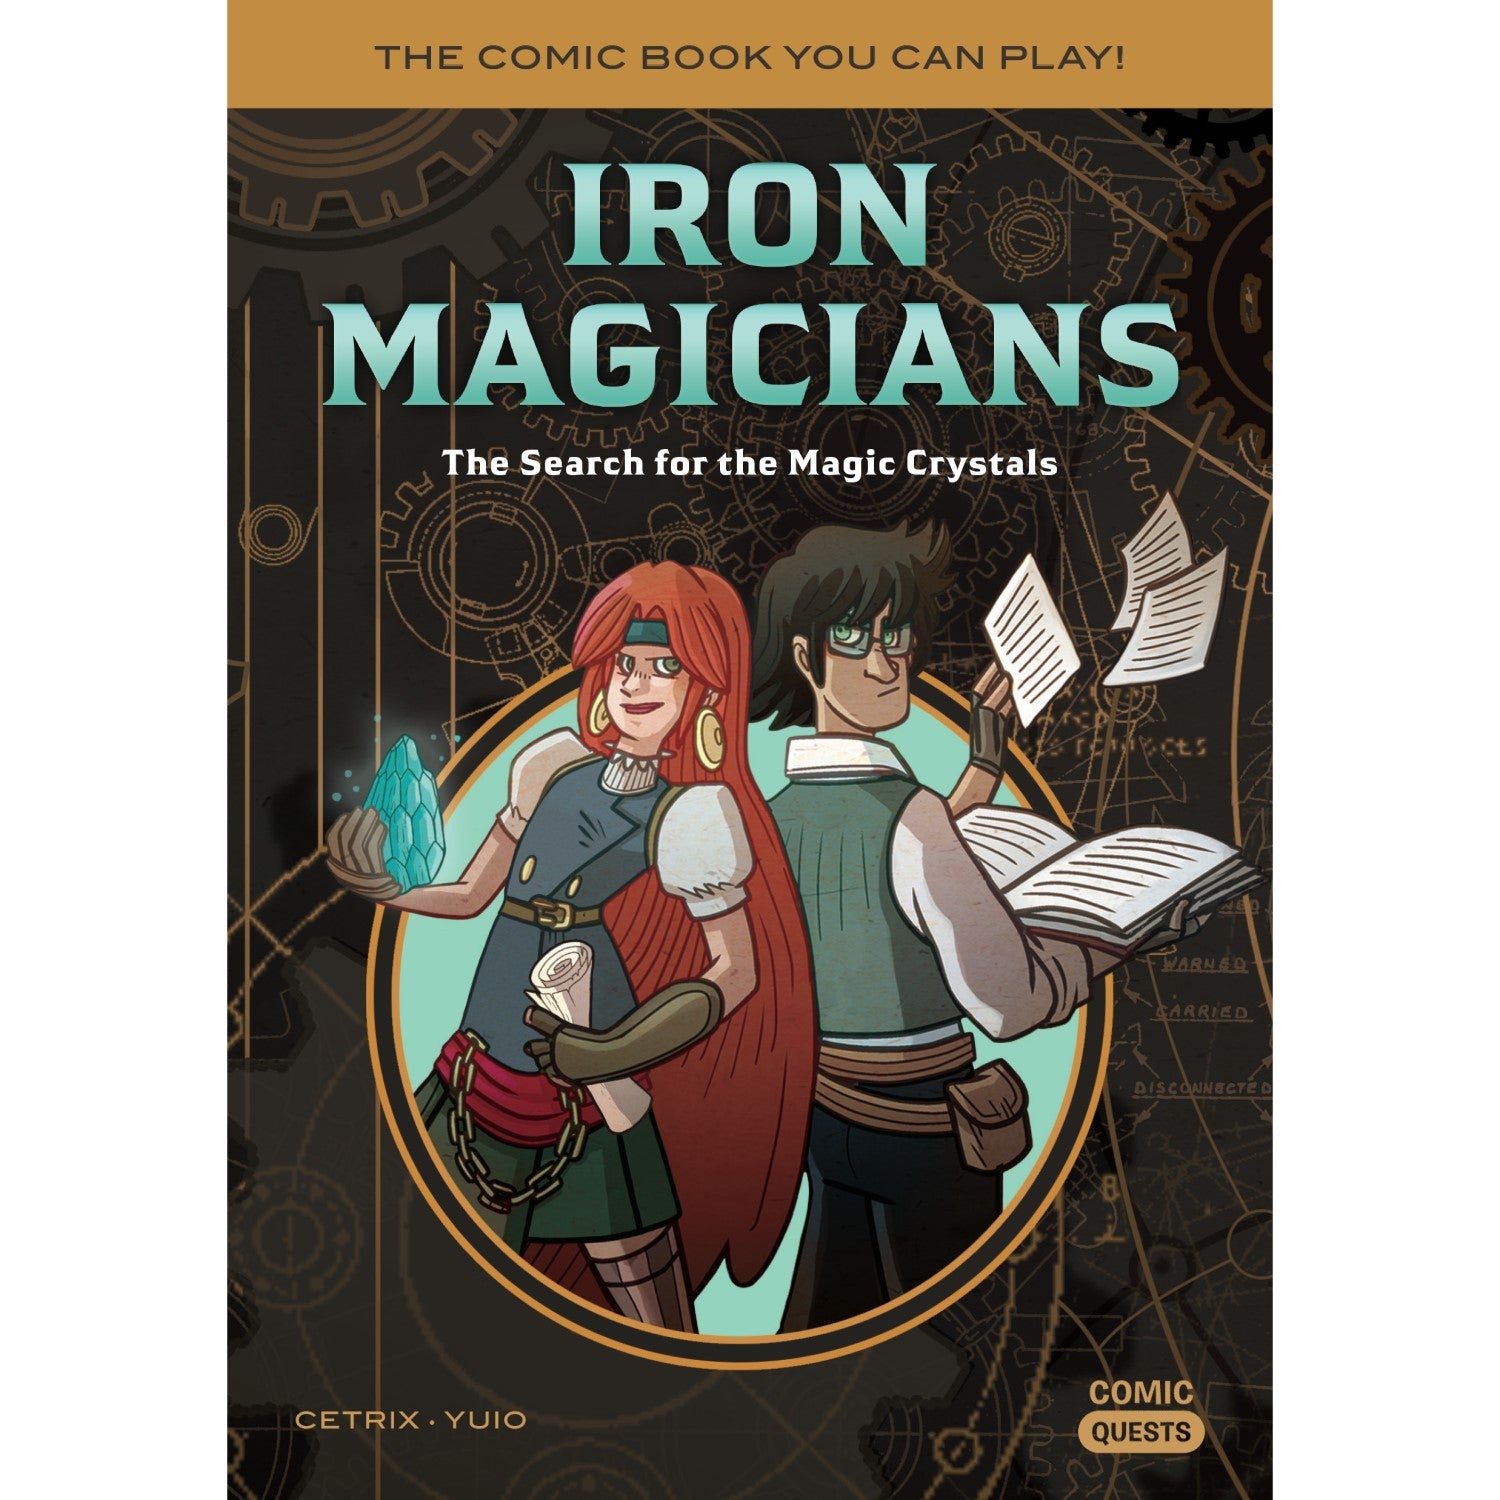 Iron Magicians The Search for the Magic CrystalsThe Comic Book You Can Play (Paperback)